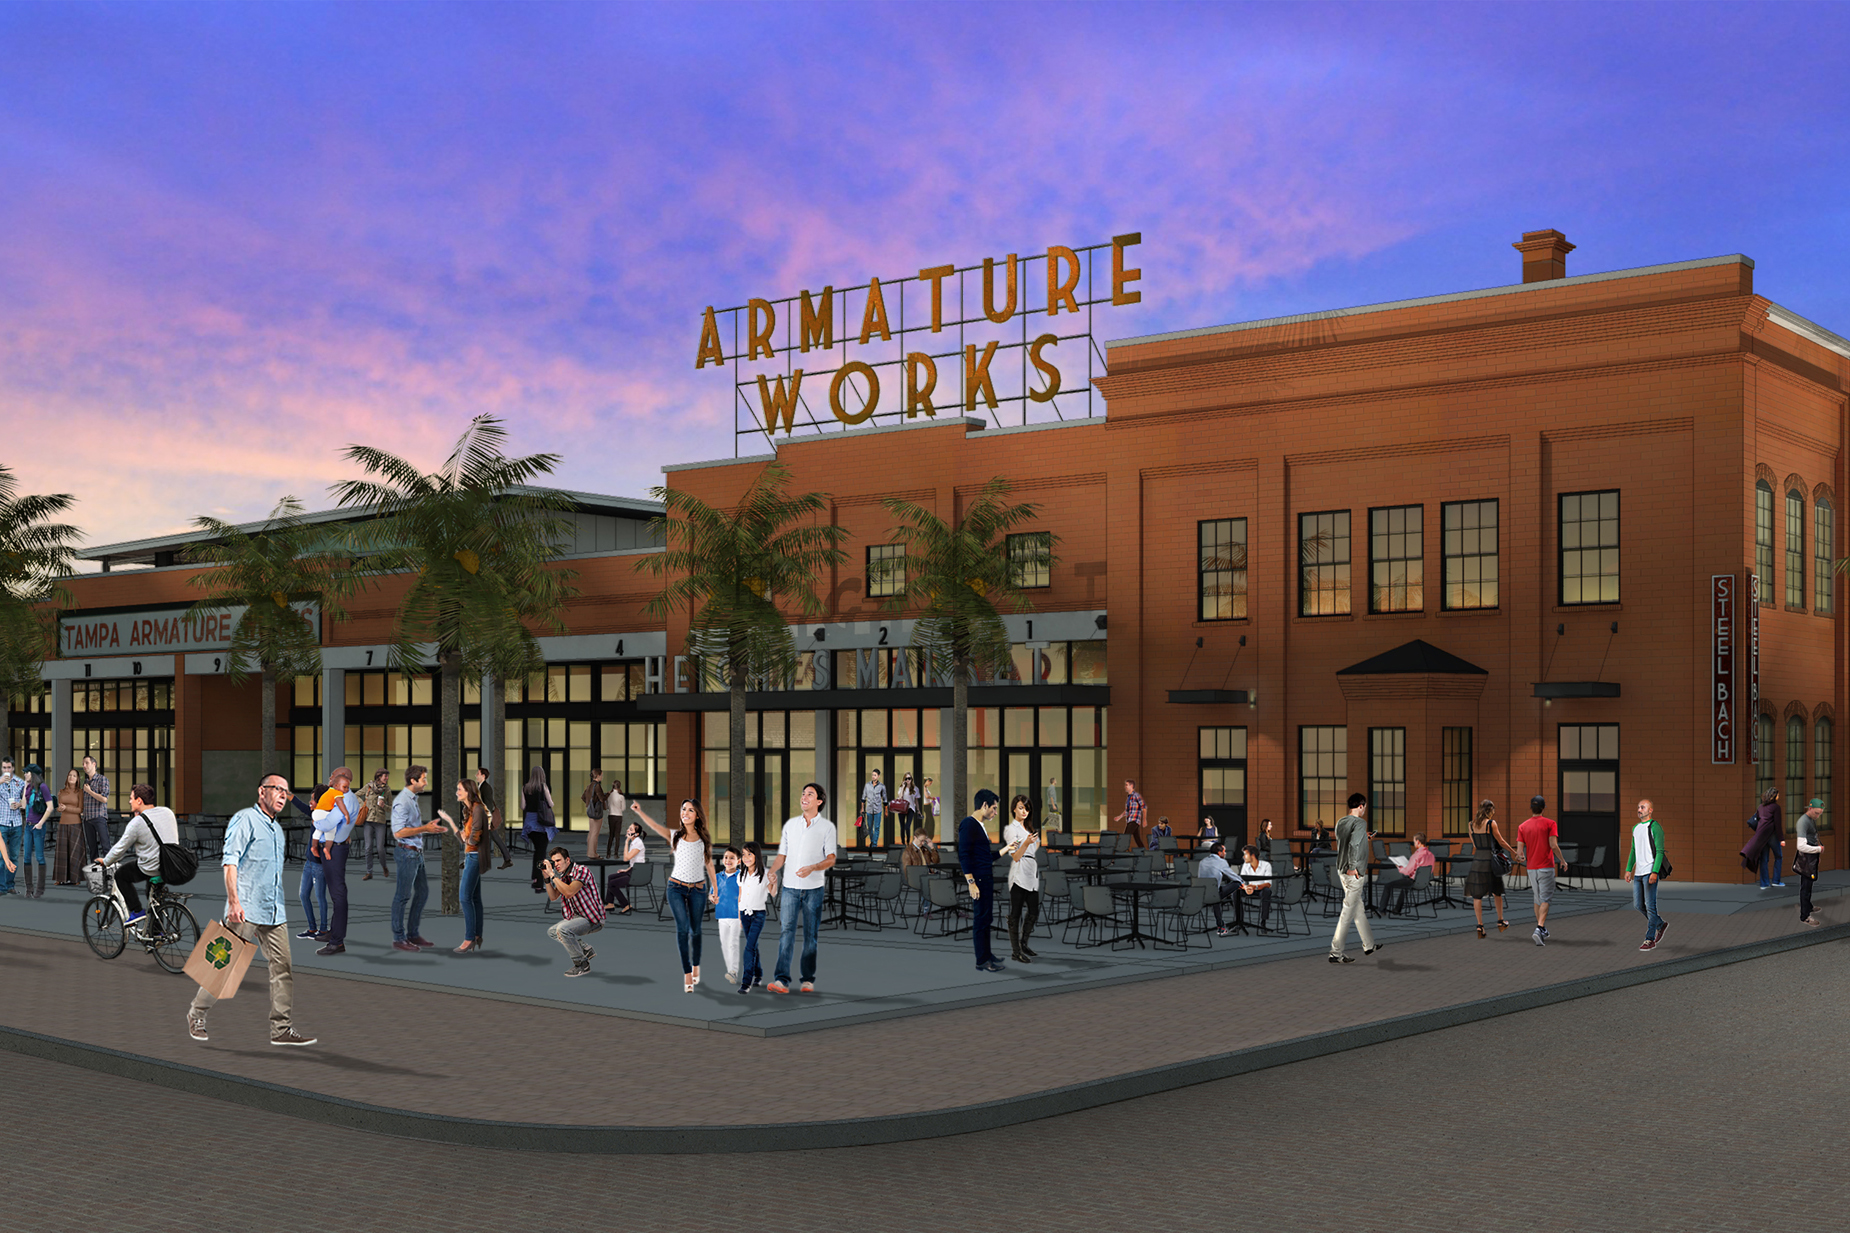 The Heights Public Market is being developed by Tampa-based SoHo Capital and will be located inside the redeveloped Armature Works building, a 70,000-square-foot structure that once served as a storage and maintenance facility for Tampa’s streetcars.